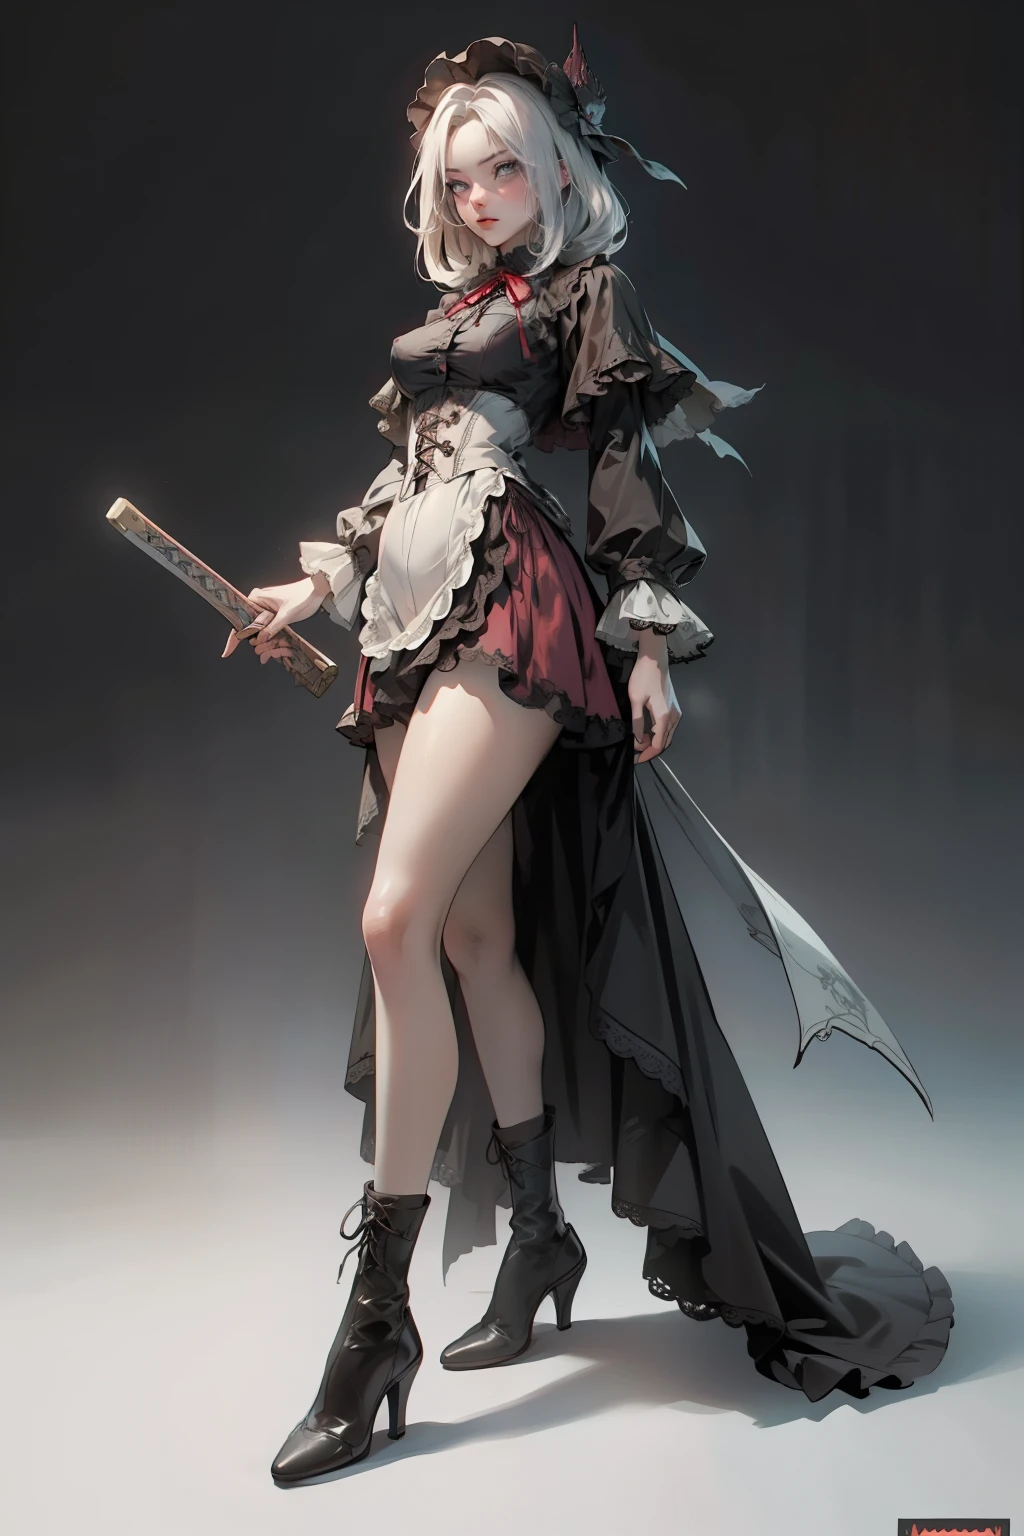 ((best quality)), ((masterpiece)), (detailed), blank white background, plain background, white background, red and white clothing, Bloodborne inspired,  occult aesthetic, occult, detailed and intricate steampunk and detailed gothic, NSFW, Very dramatic and cinematic lighting, cosmic horror, grim-dark, side-lighting, perfect face, NSFW, Fluttering lace flared long knee length dress with frilly petticoats, knee length dress, pleated petticoats, lolita dress, petticoats gothic lolita, complex lace boots, side-lighting, gothic lolita aesthetic, wielding a mighty sword with mechanical components, carbine, NSFW, beautiful small breasts, small breasts, full body, whole body, body, plain background, white background, blank background, no background, white background NSFW, full body, whole body, head-to-toe NSFW